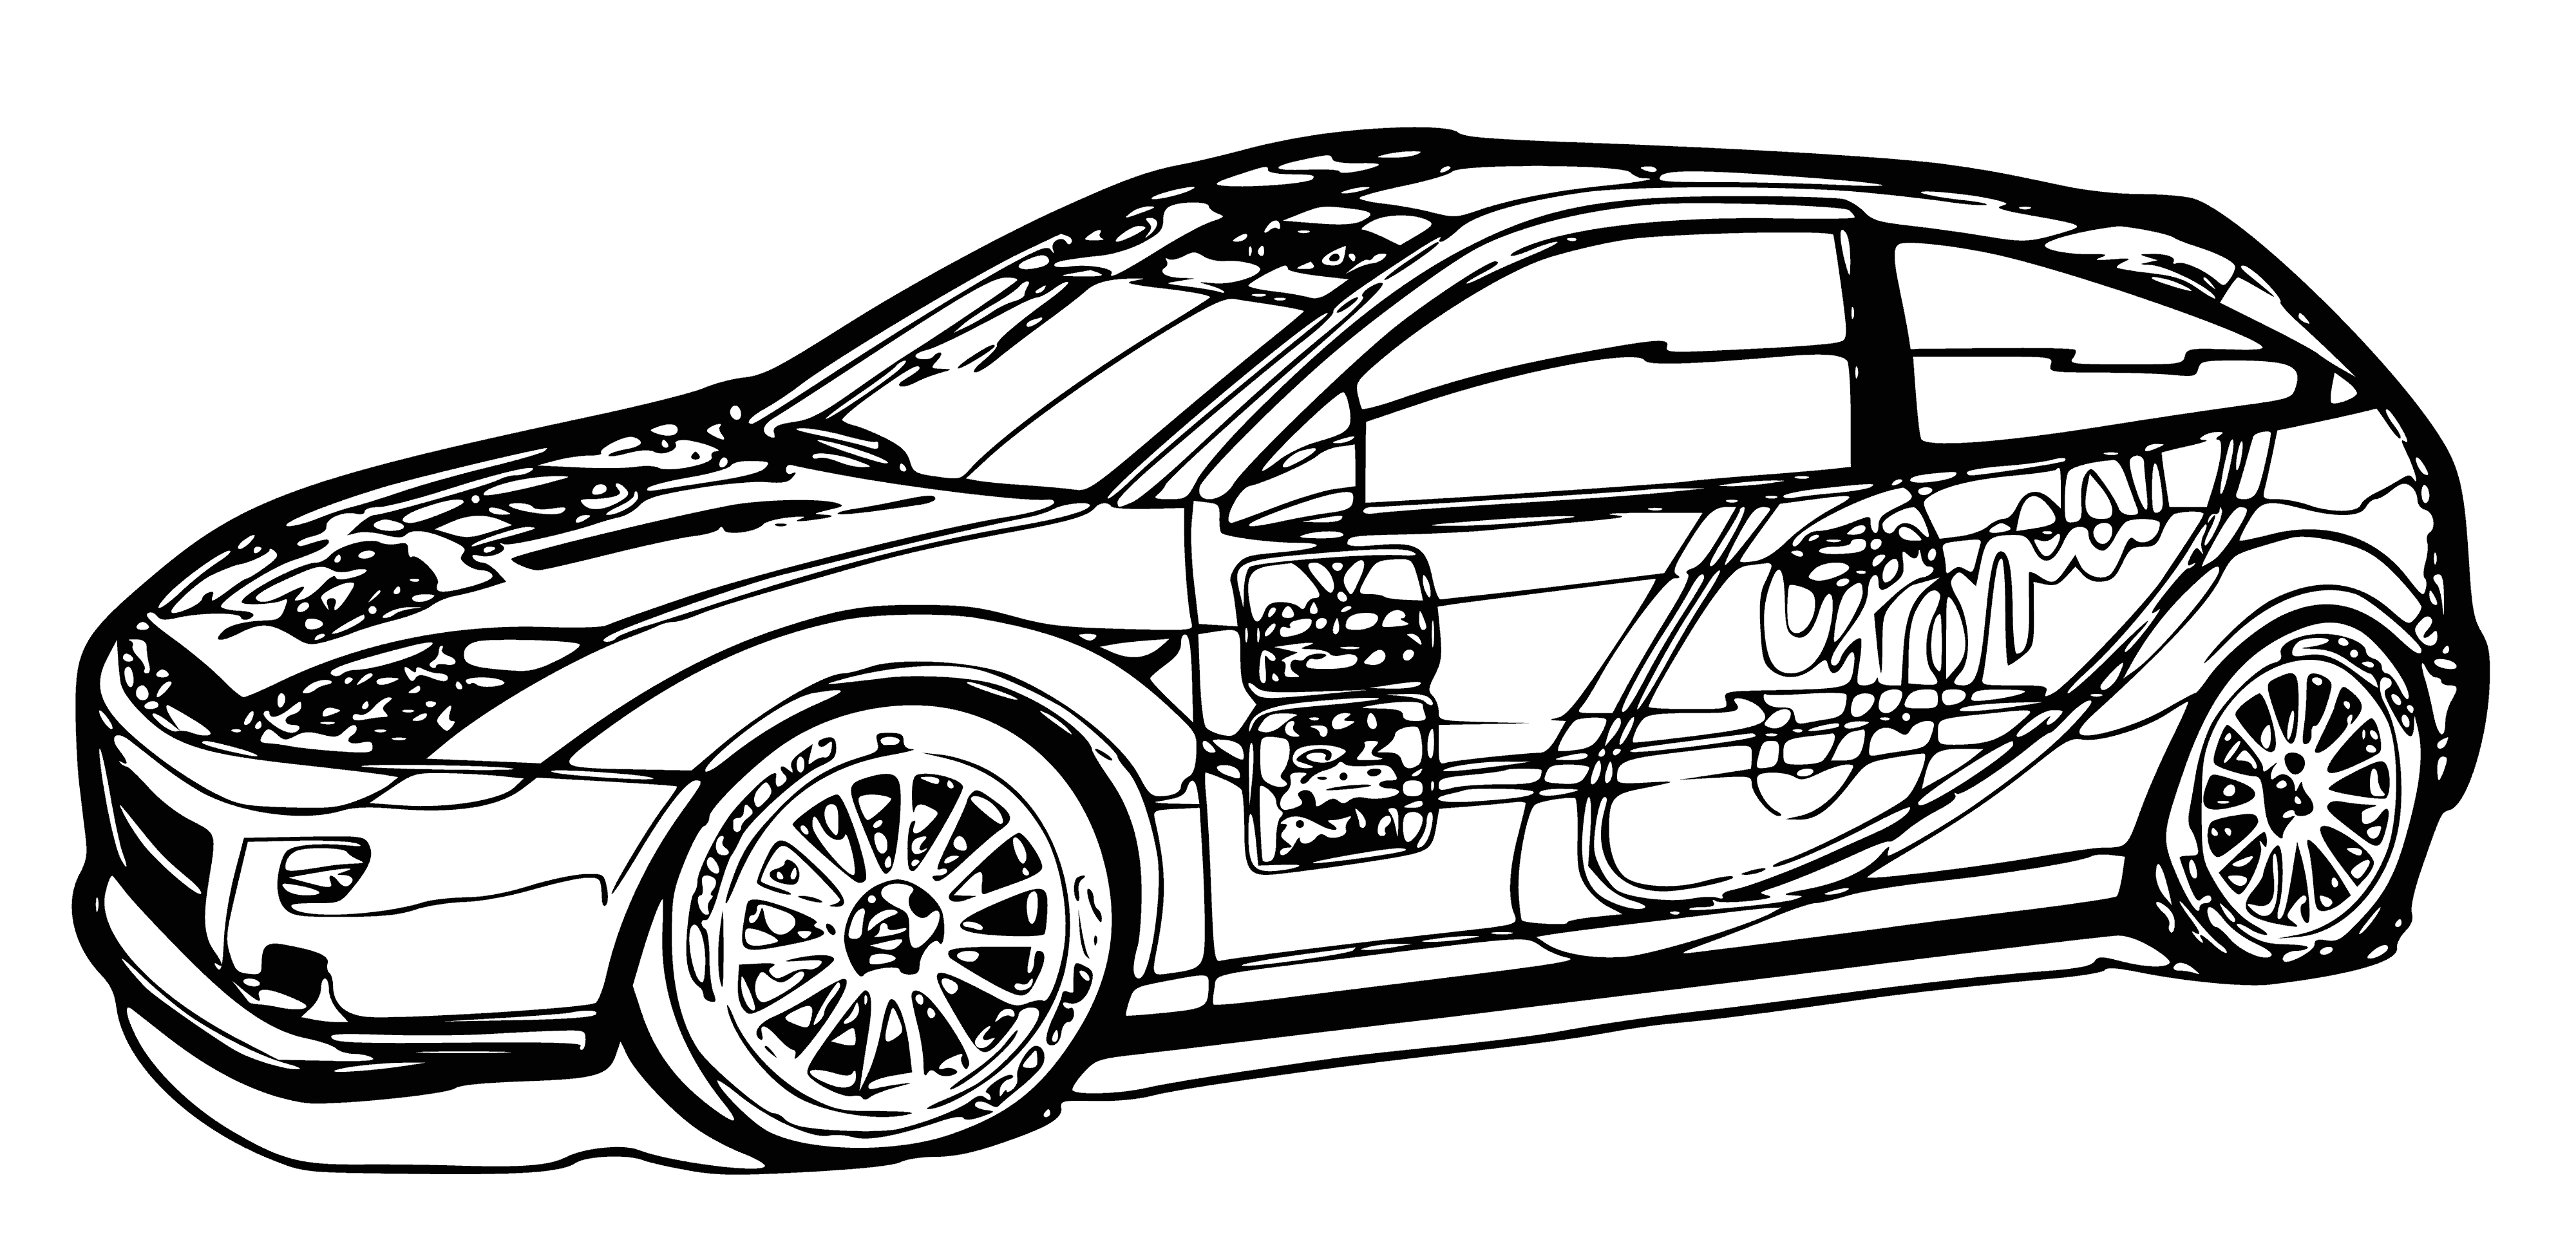 coloring page: Blue car leads race, followed by red car, with white, black and grey cars also in race. #racingcars